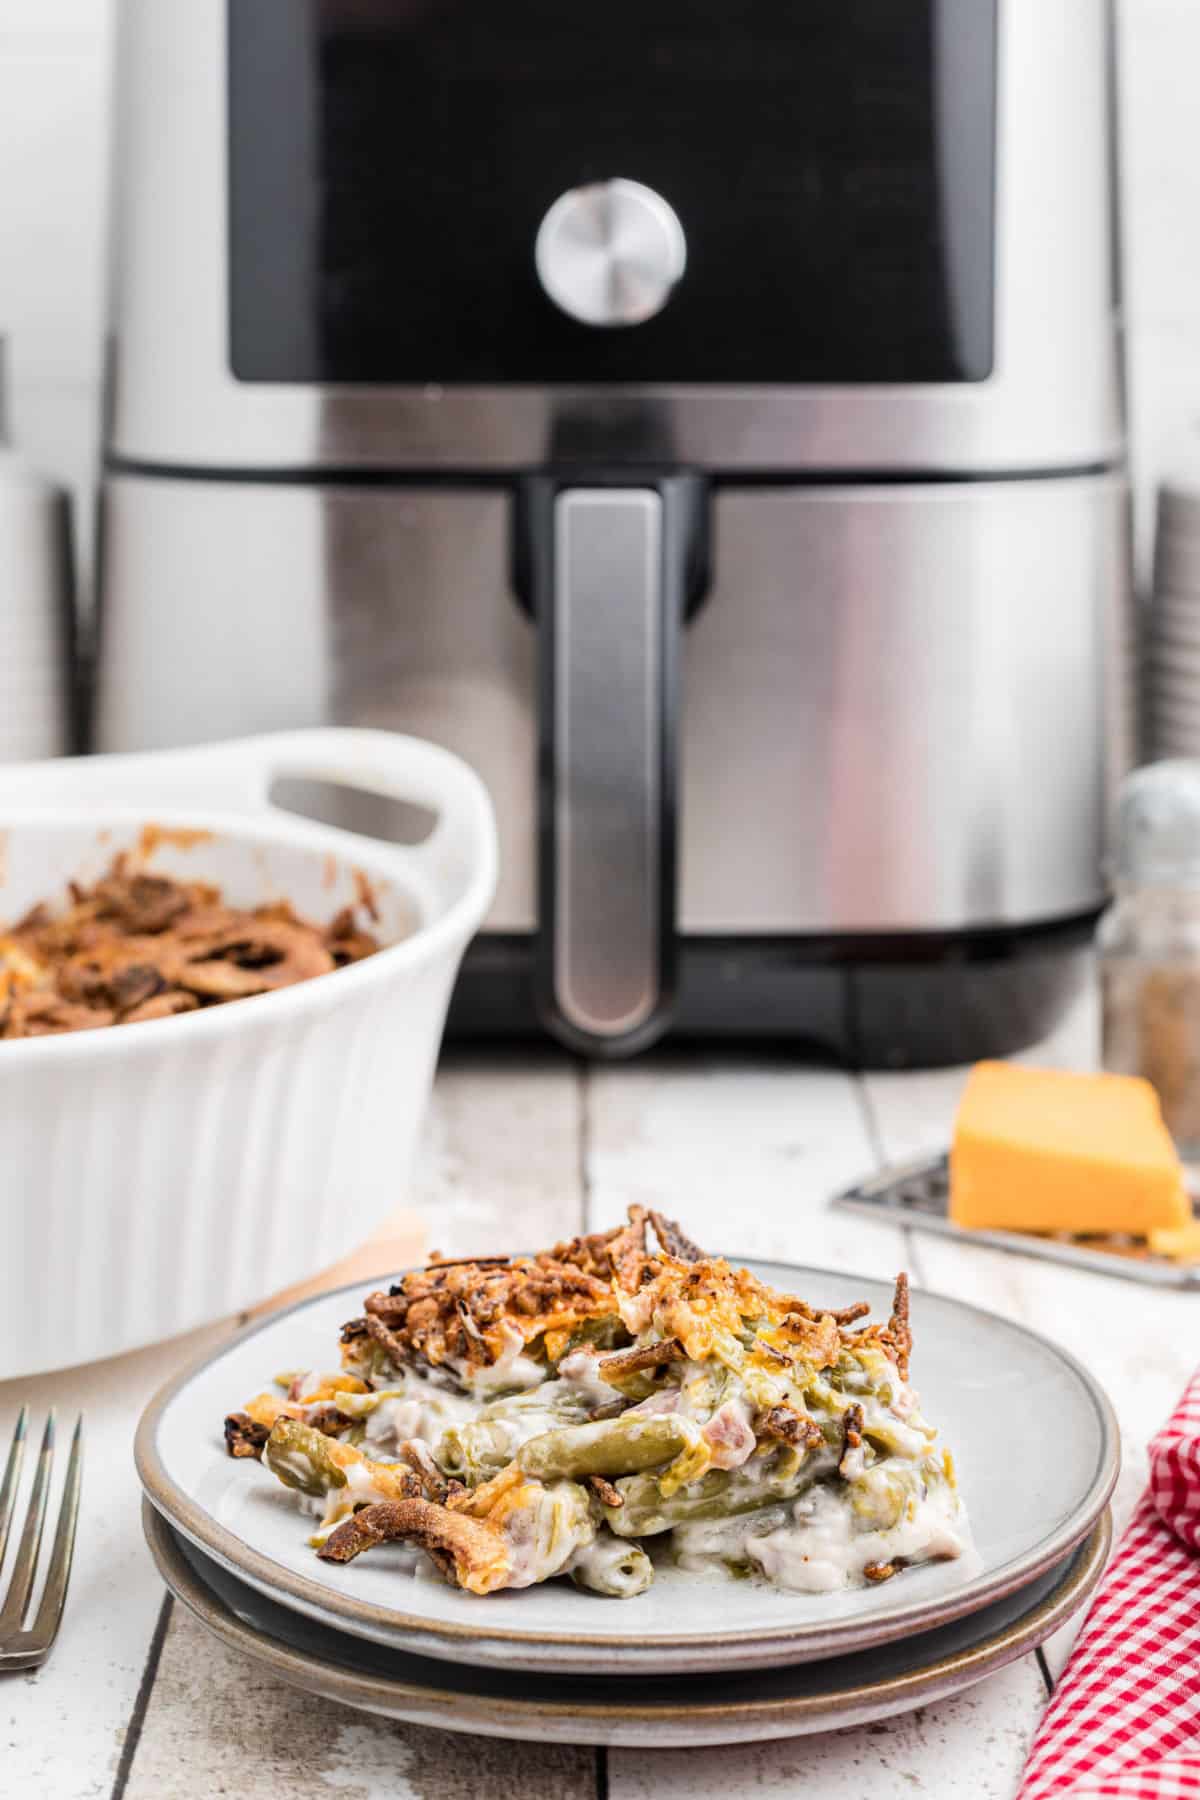 A dish with a serving of green bean casserole in front of an air fryer.